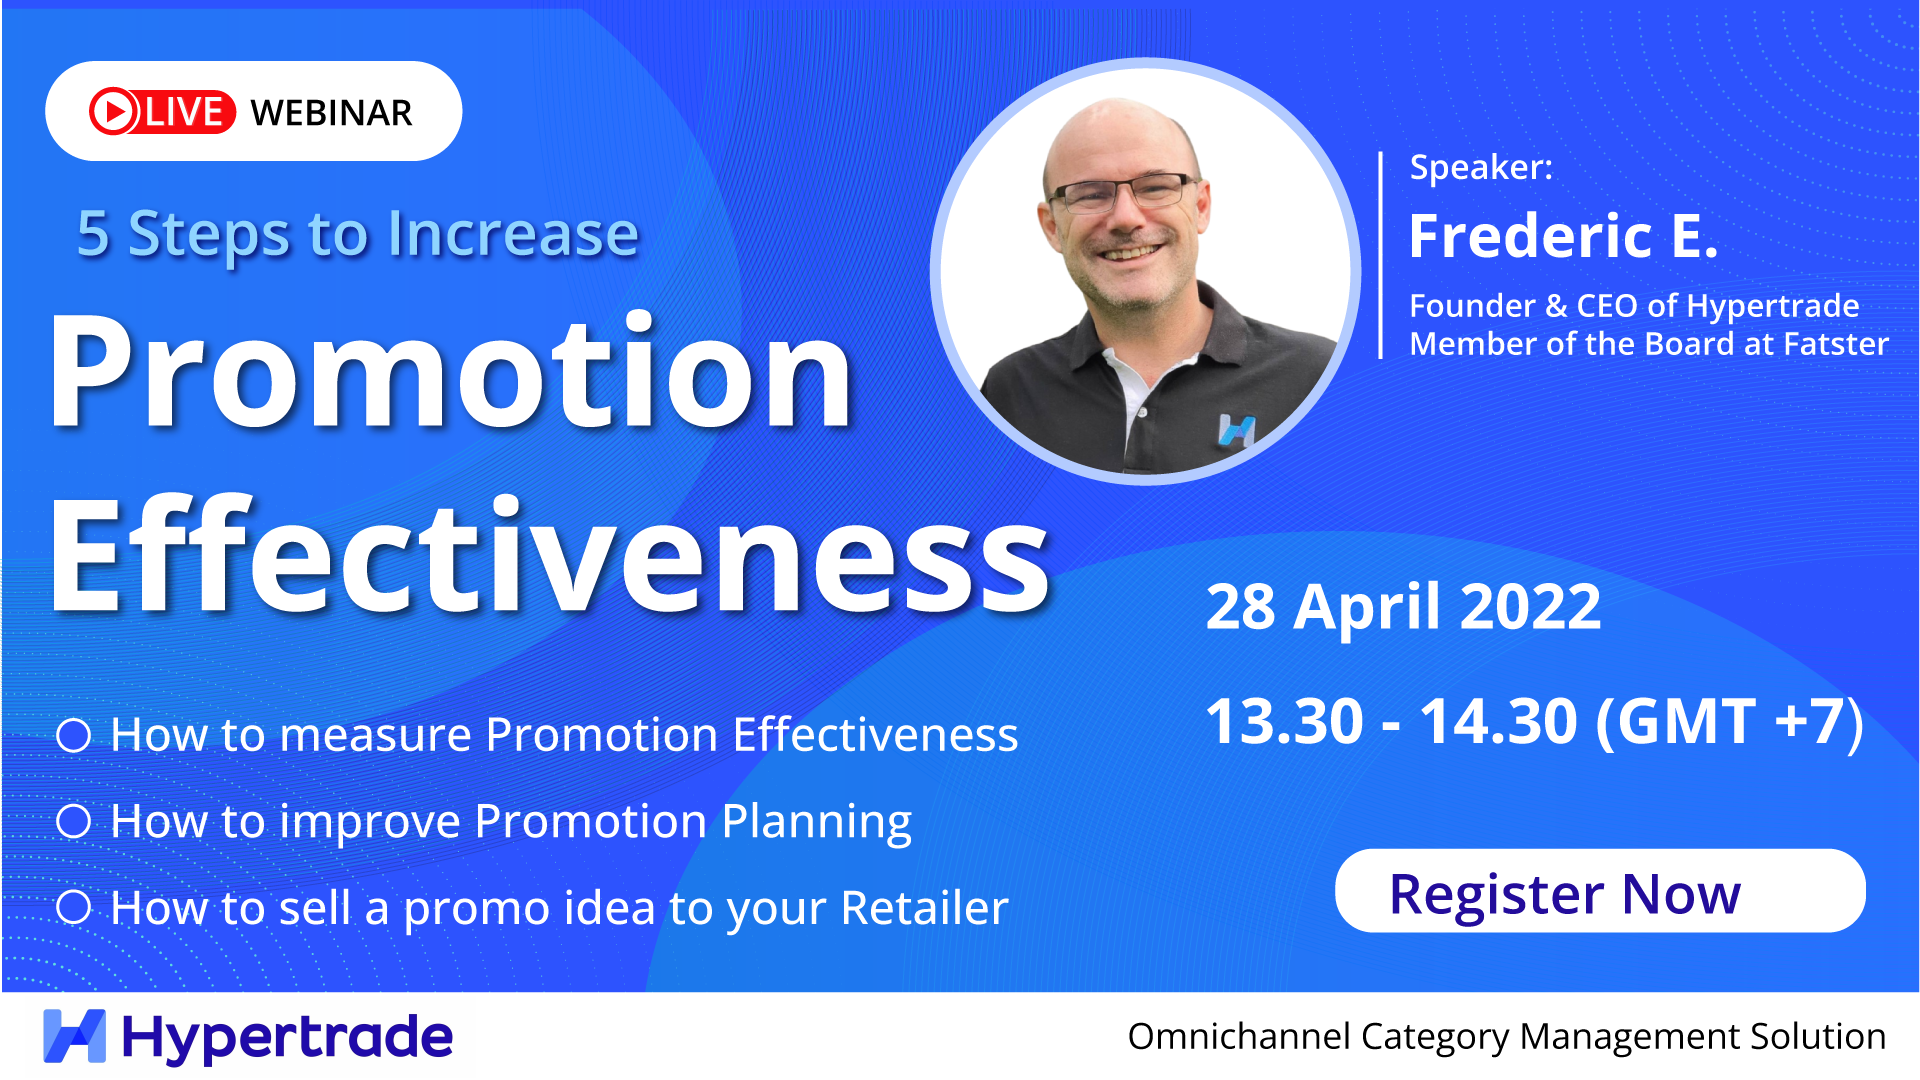 5 steps to increase promotion effectiveness